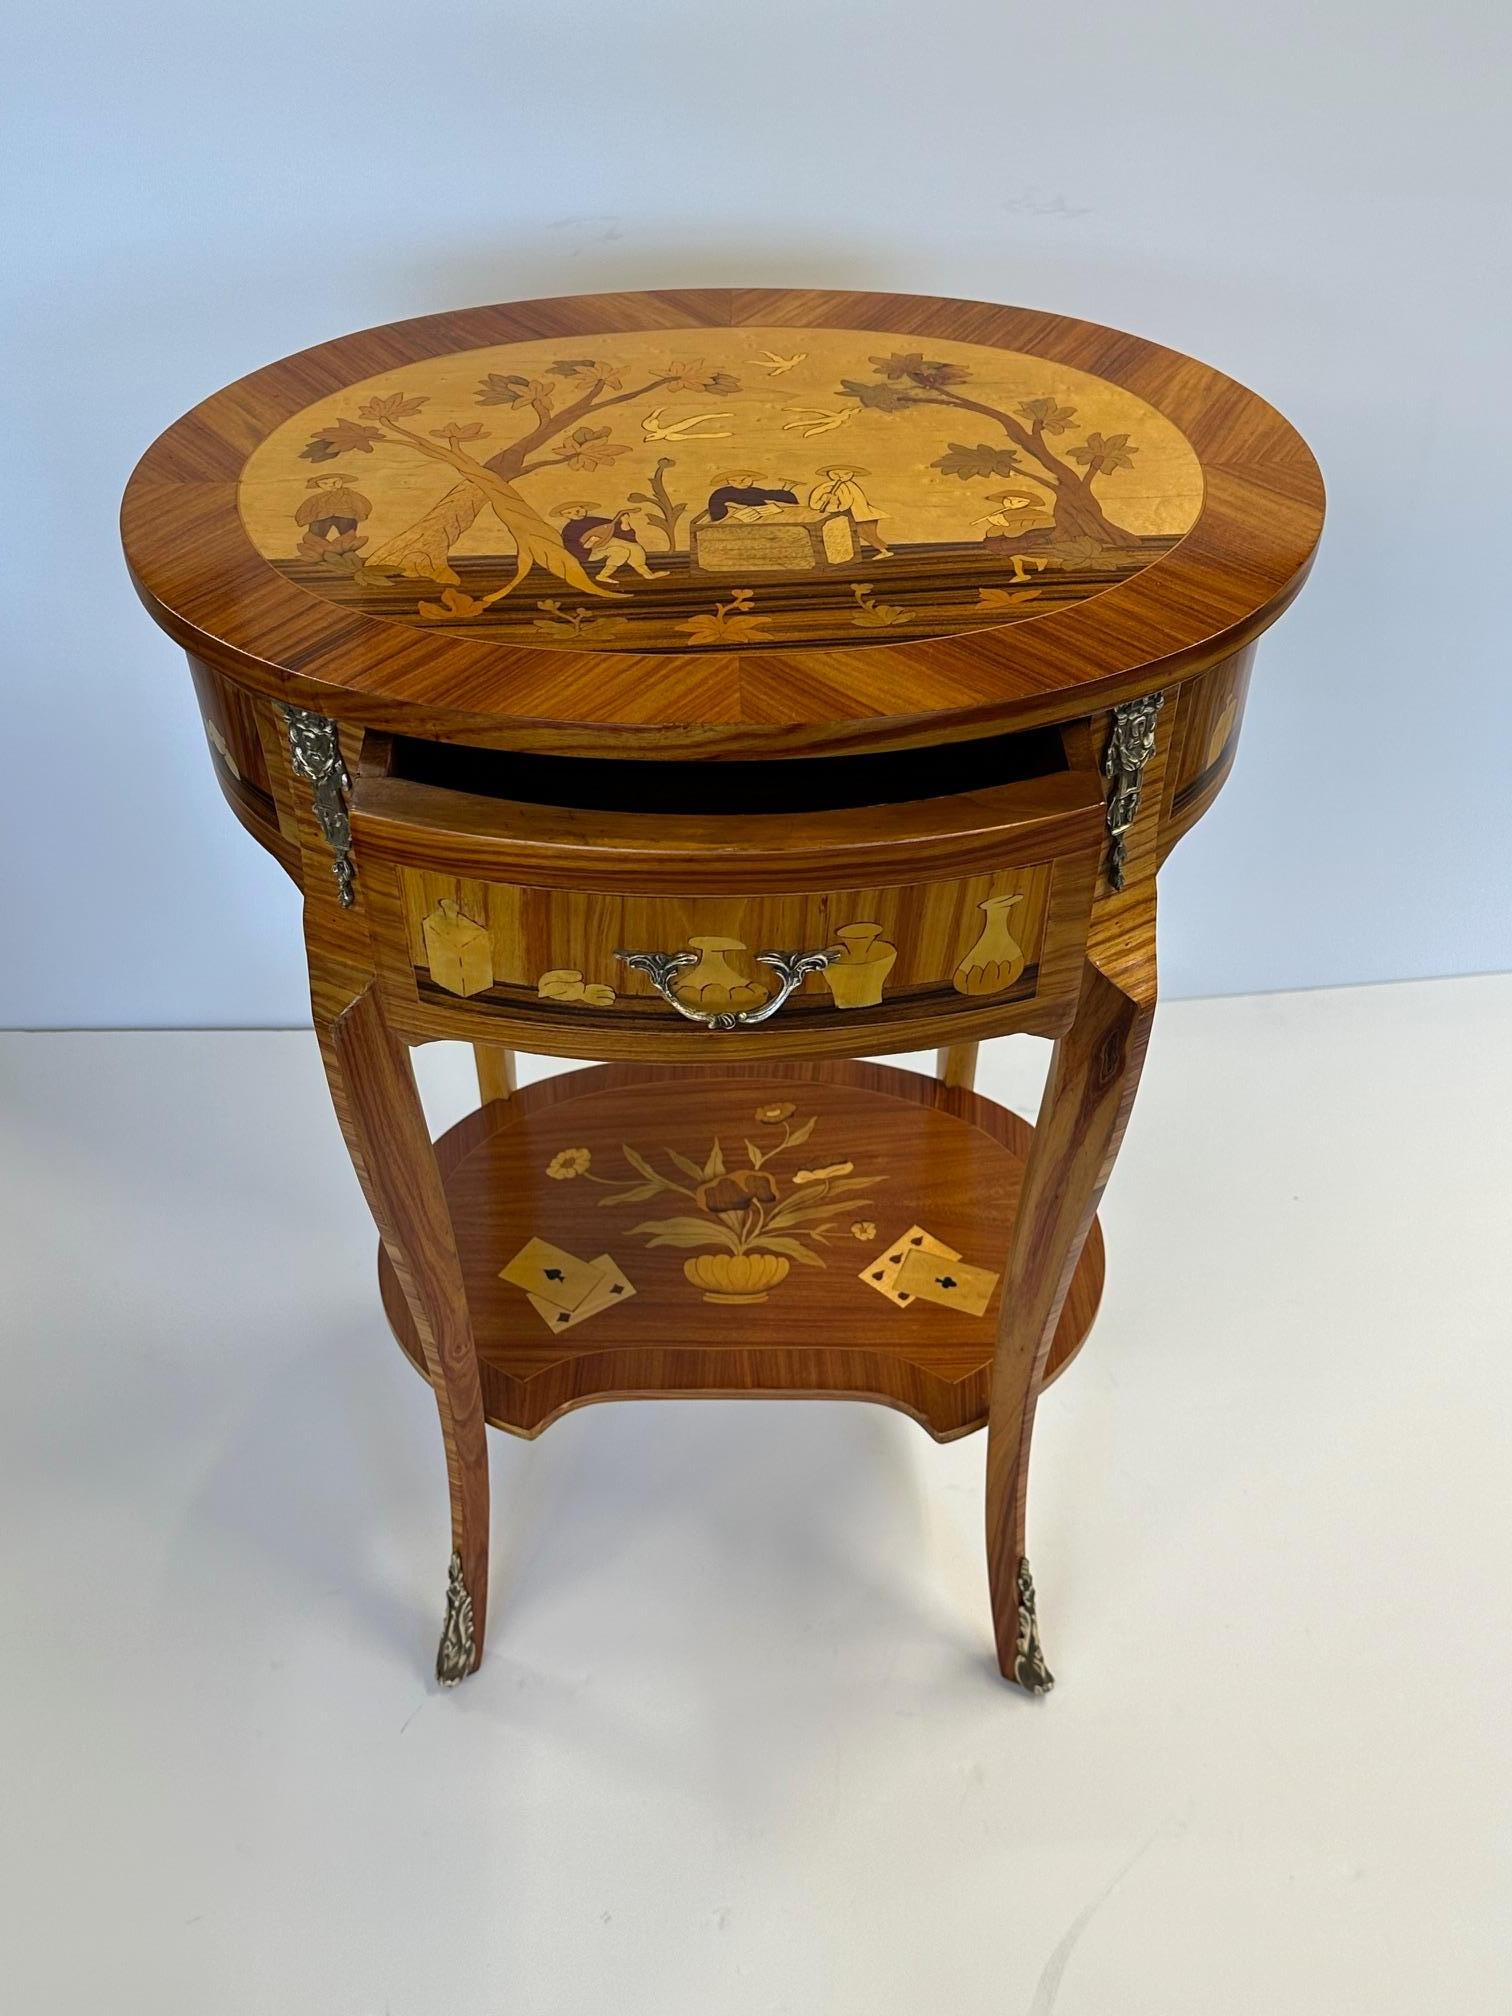 Elegant pair of Italian satinwood and mixed wood inlaid night stands or end tables each having one drawer, second tier with playing card decoration, and sinuous curved legs.